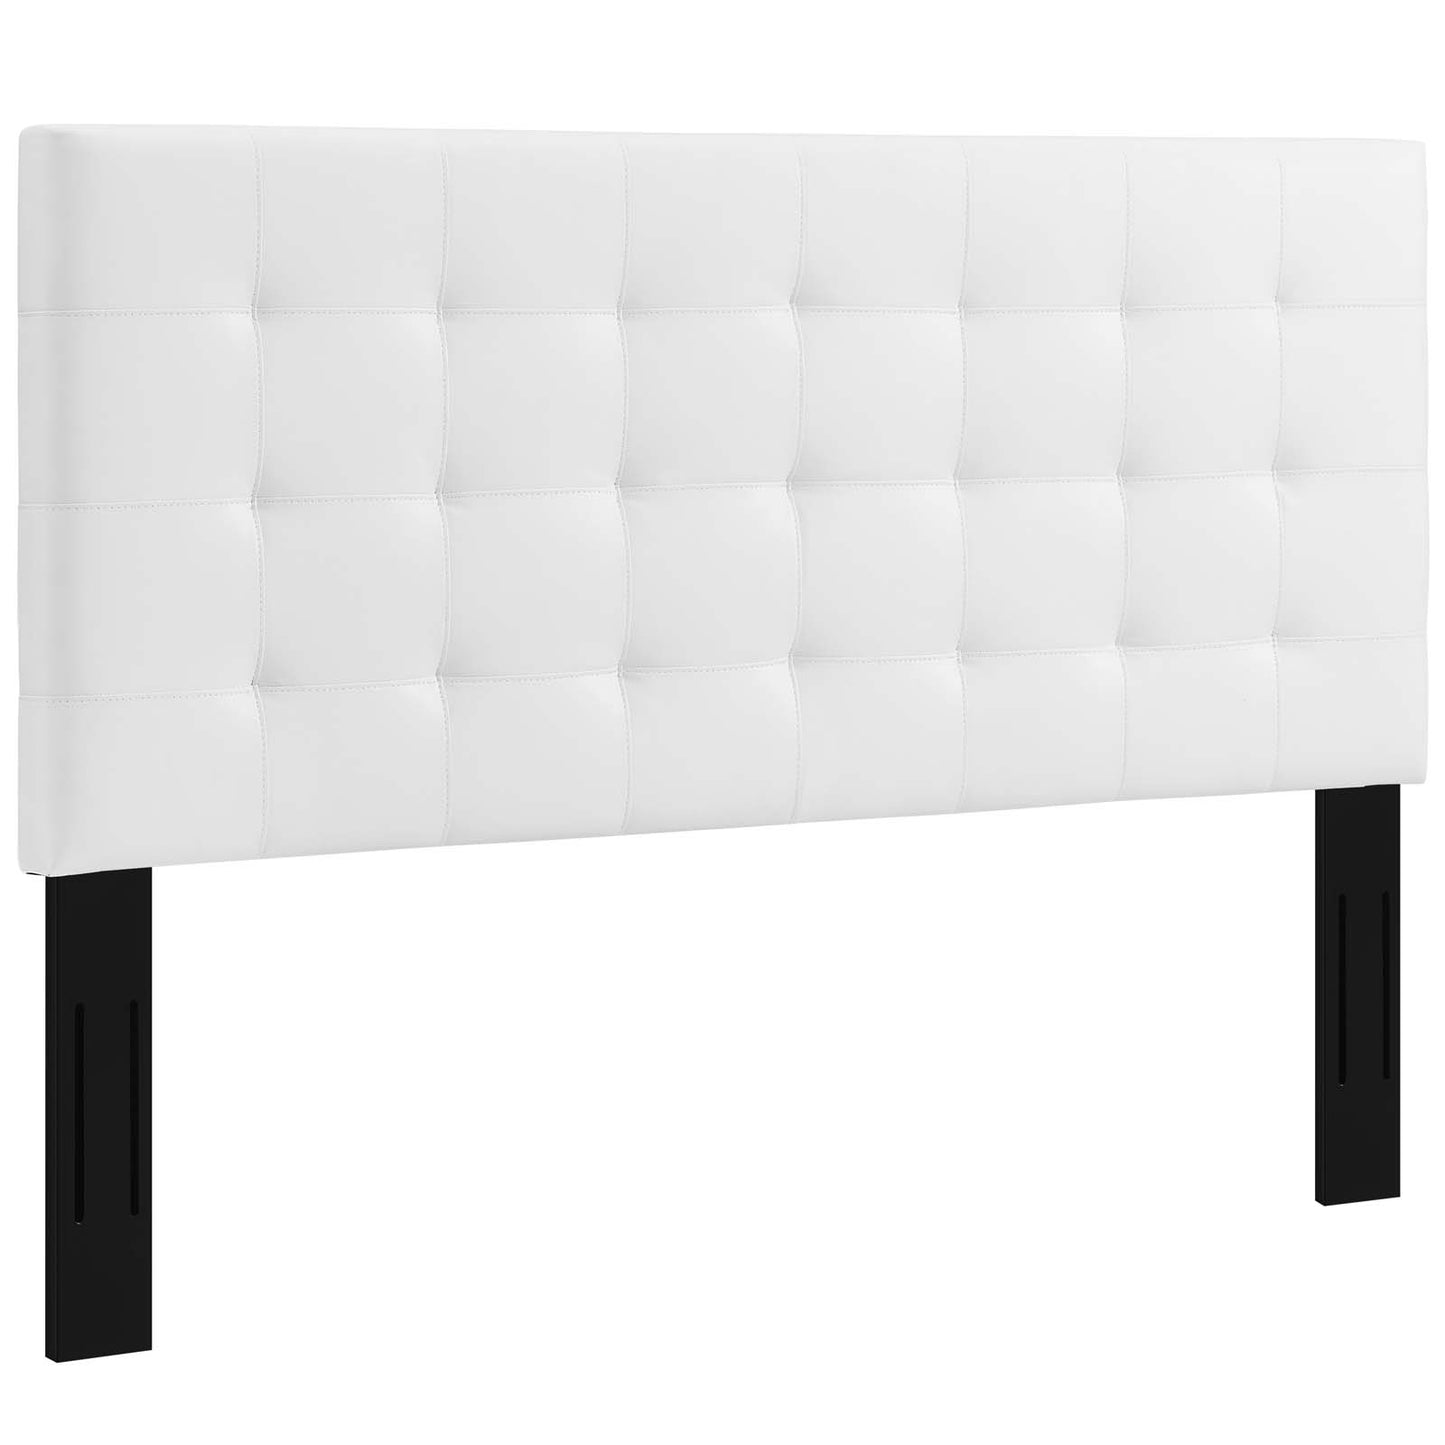 Paisley Tufted Full / Queen Upholstered Faux Leather Headboard White MOD-5854-WHI